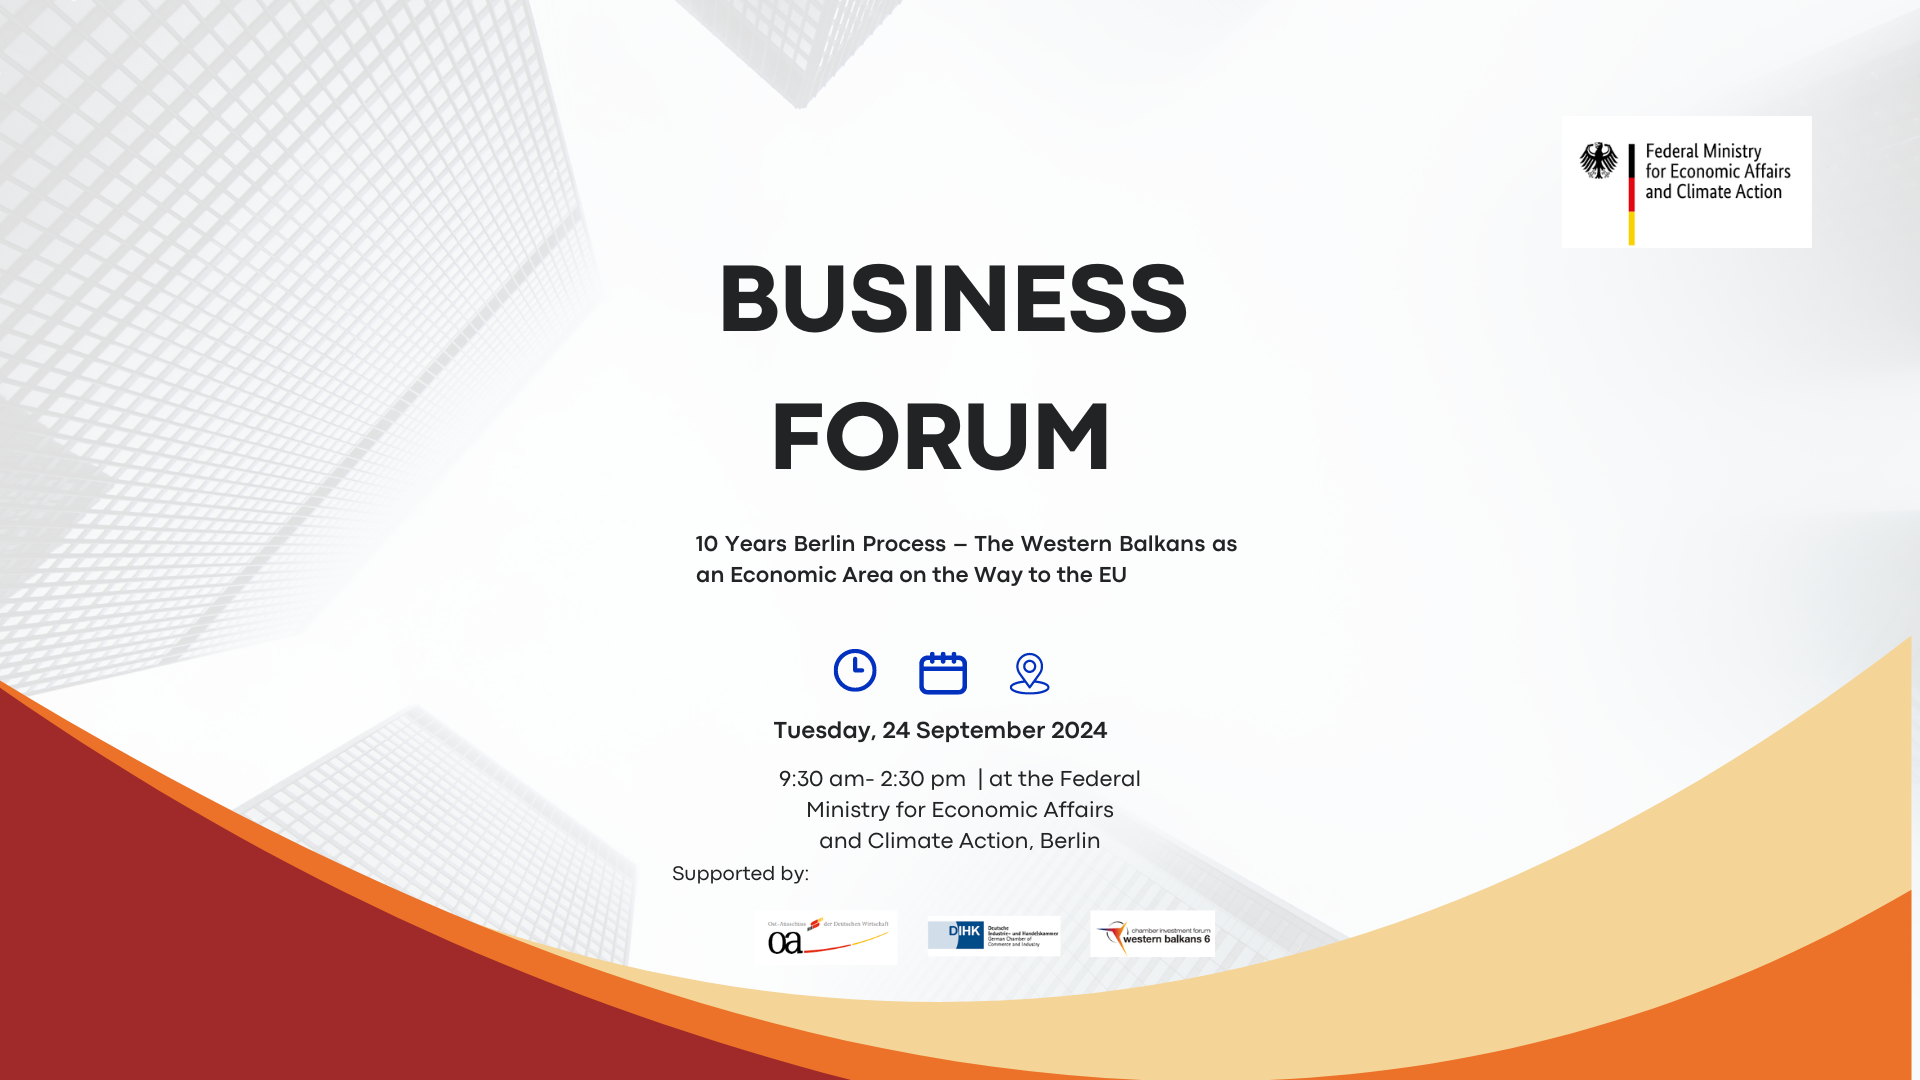 Business Forum: 10 Years Berlin Process – The Western Balkans as an Economic Area on the Way to the EU